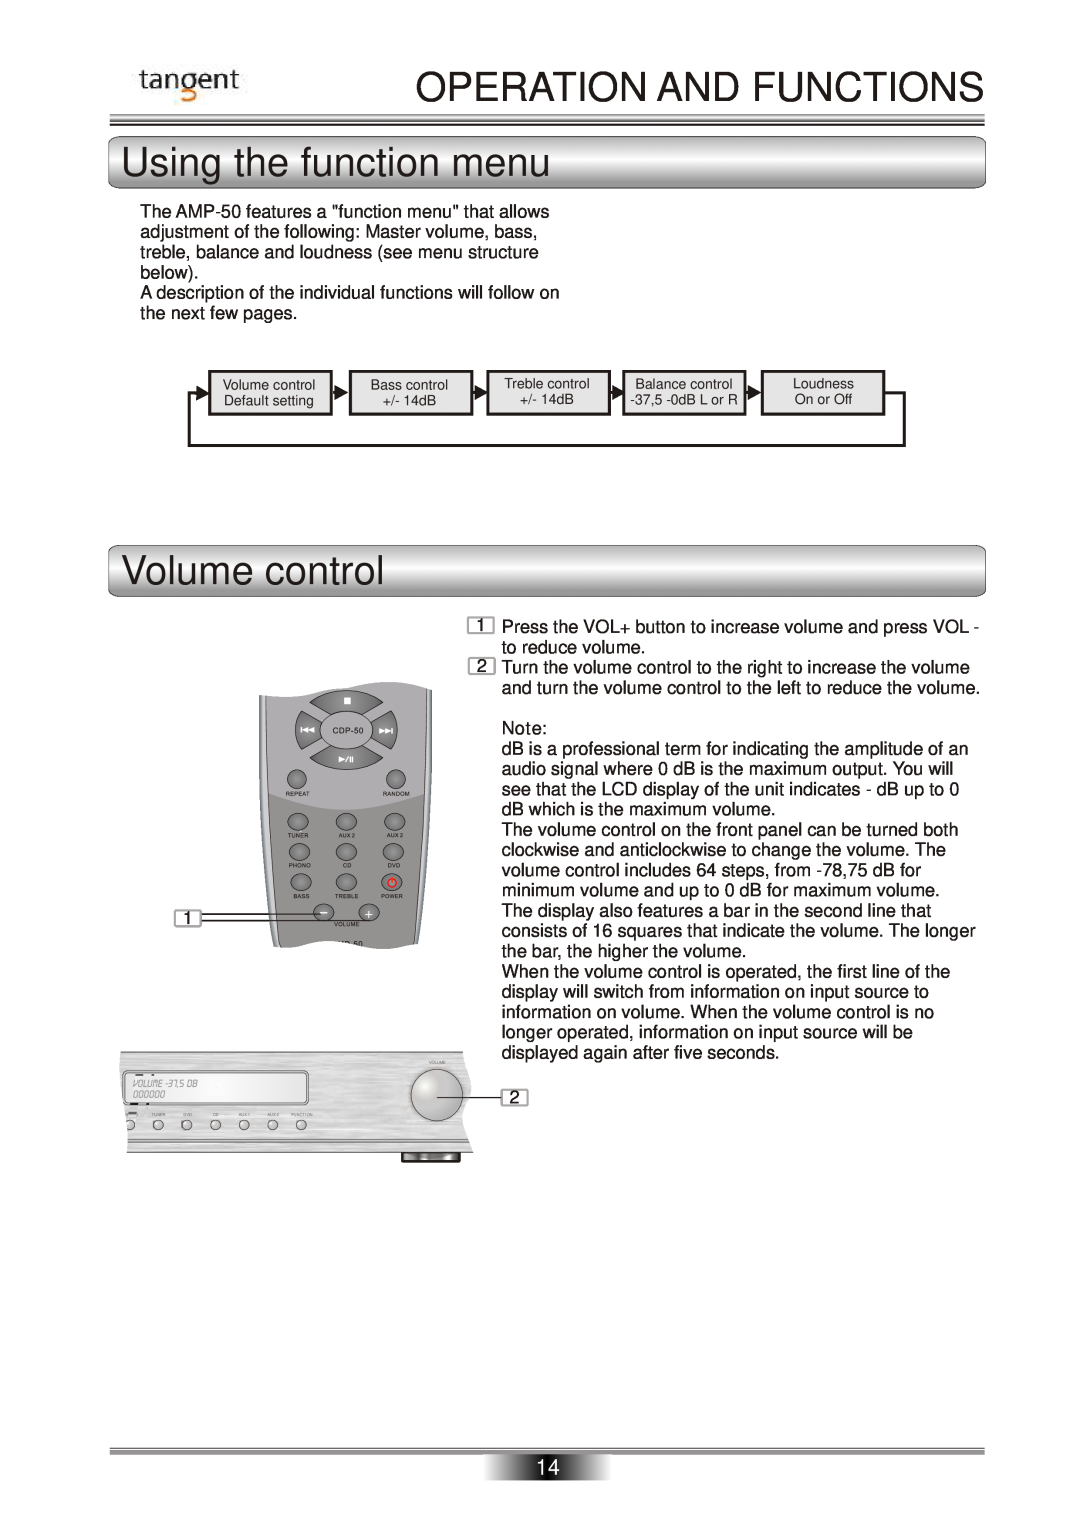 Tangent AMP-50 operation manual OPERATION AND FUNCTIONS Using the function menu, Volume control 